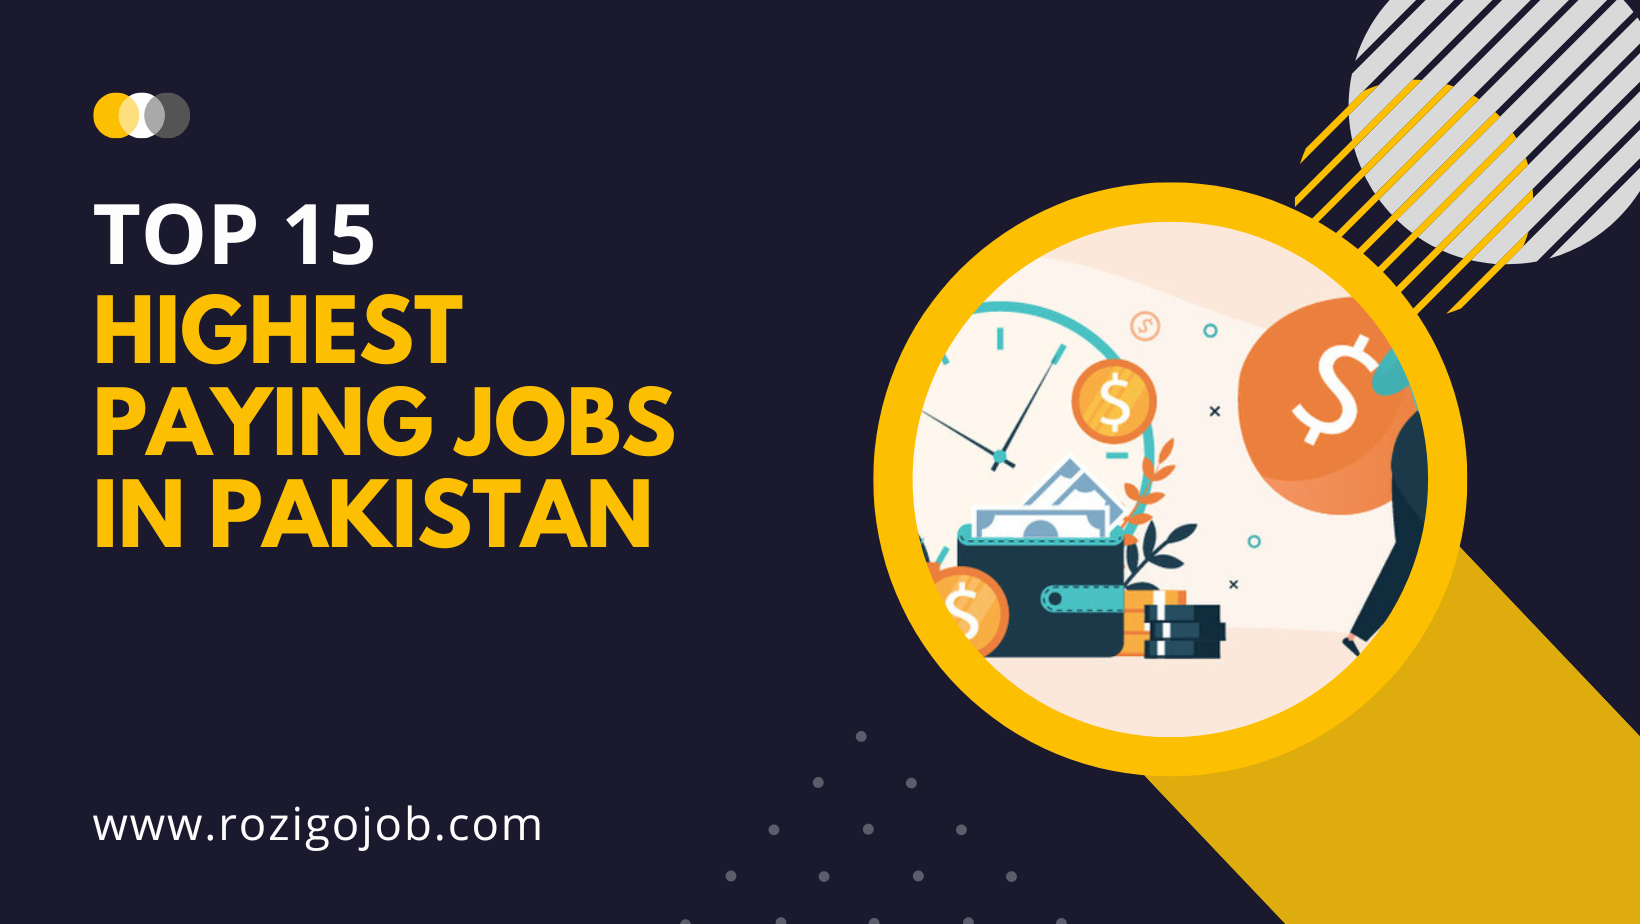 Top 15 highest paying jobs in Pakistan